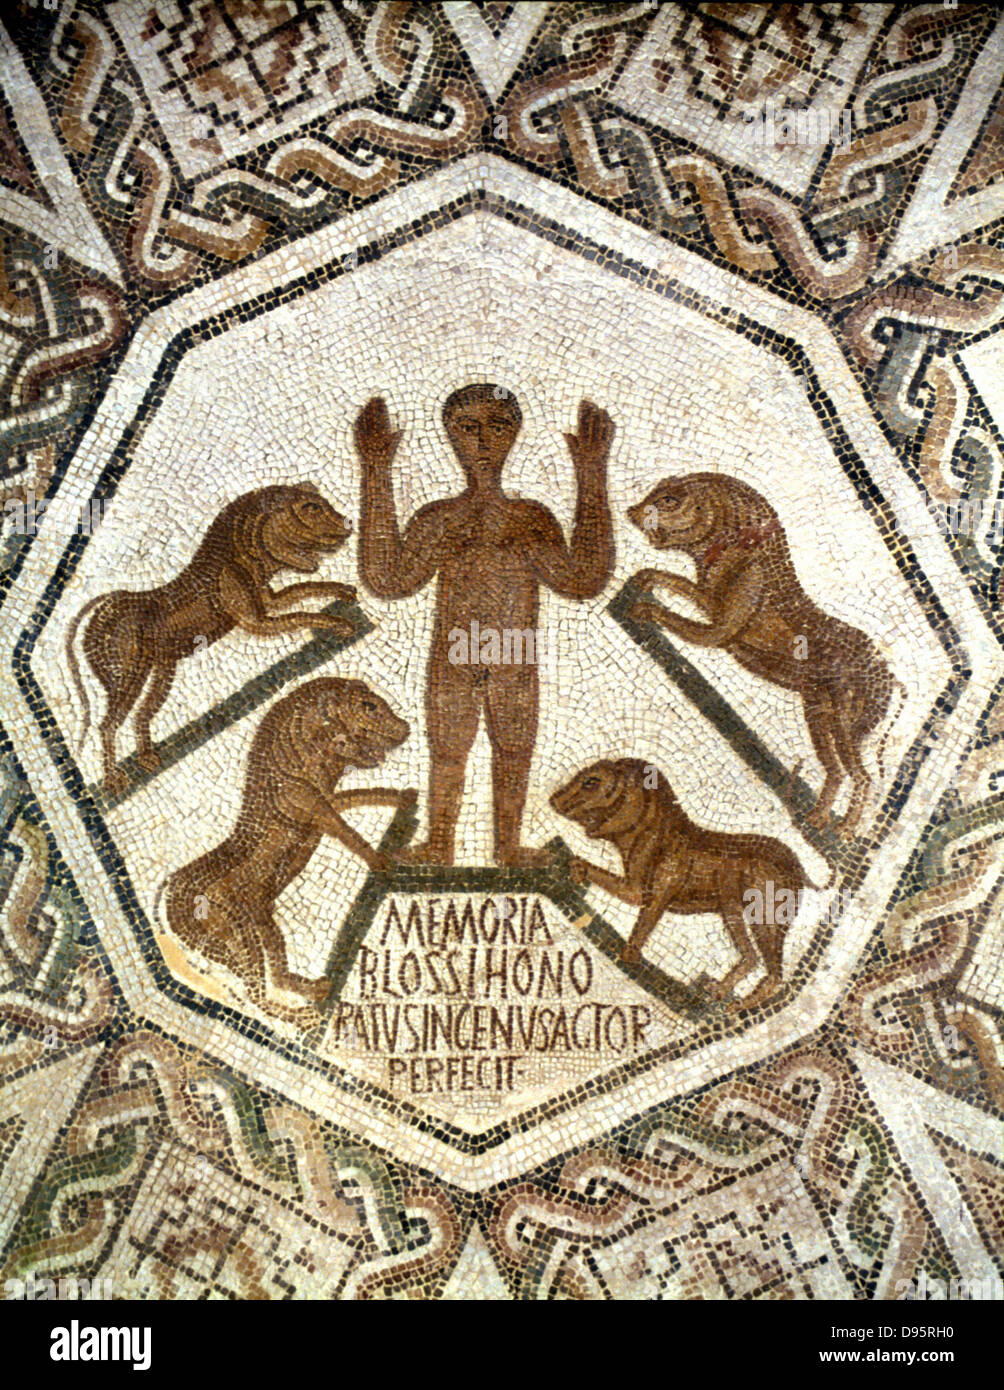 Roman mosaic showing Daniel, one of four great Hebrew prophets,  cast into the Lions' den by Nebuchadnezzar (Nebuchadrezzar) king of Babylon. 'Bible' Daniel 6:20.  Daniel's survival demonstrated power of his true God Jehovah and insignificance of the Assyrio-Babylonian god Bel (Baal).  5th century AD. Bardo Museum, Tunis Stock Photo